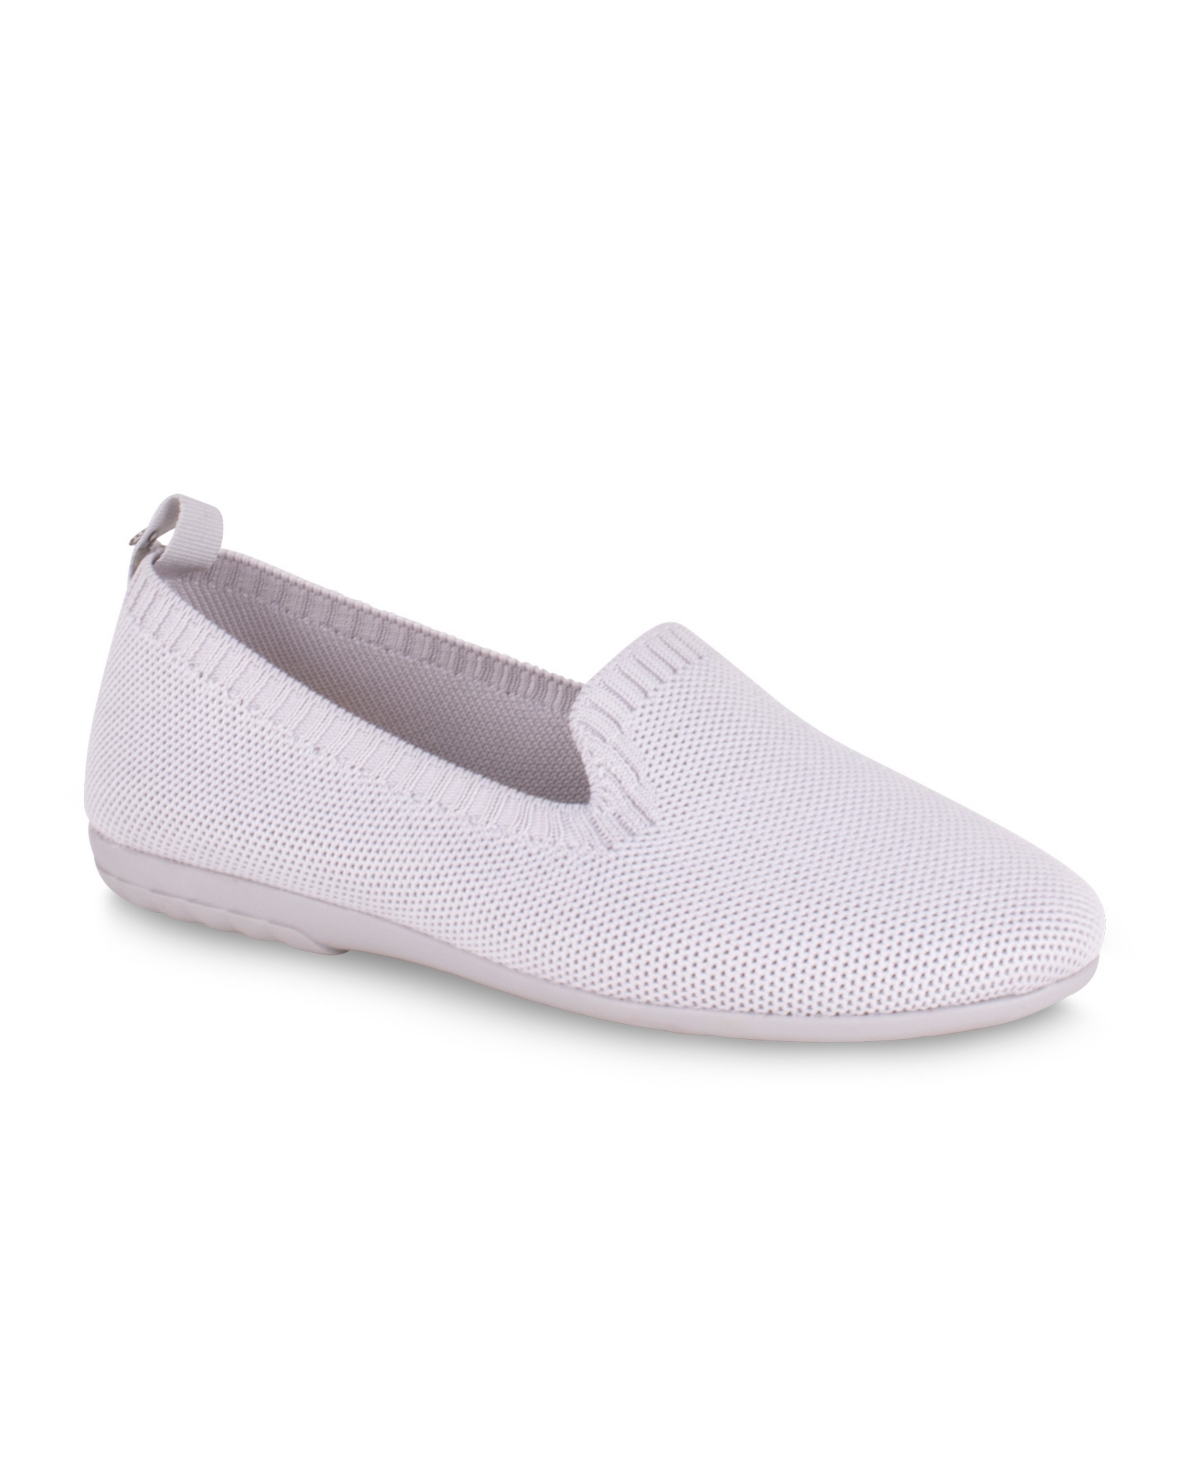 Women's Carrie Knit Slip On Loafer - Natural